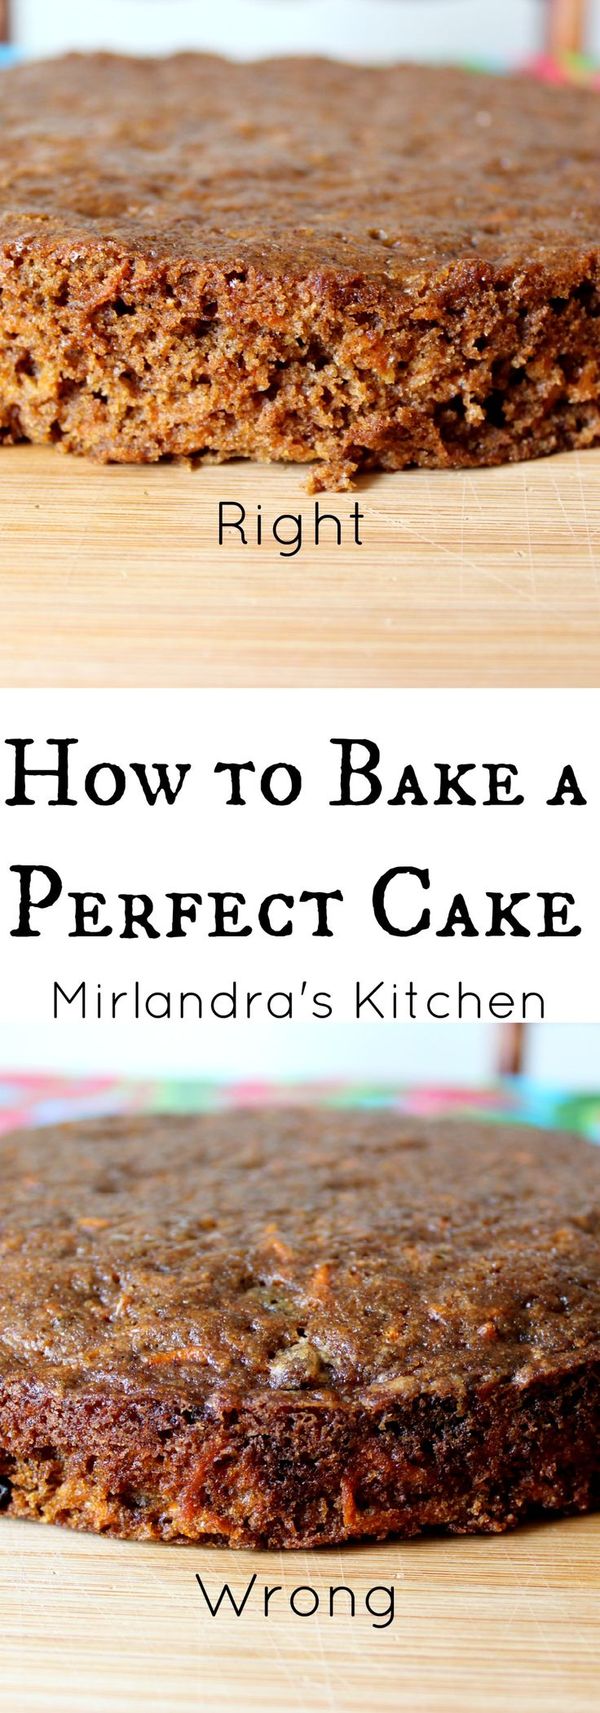 How to Bake a Perfect Cake